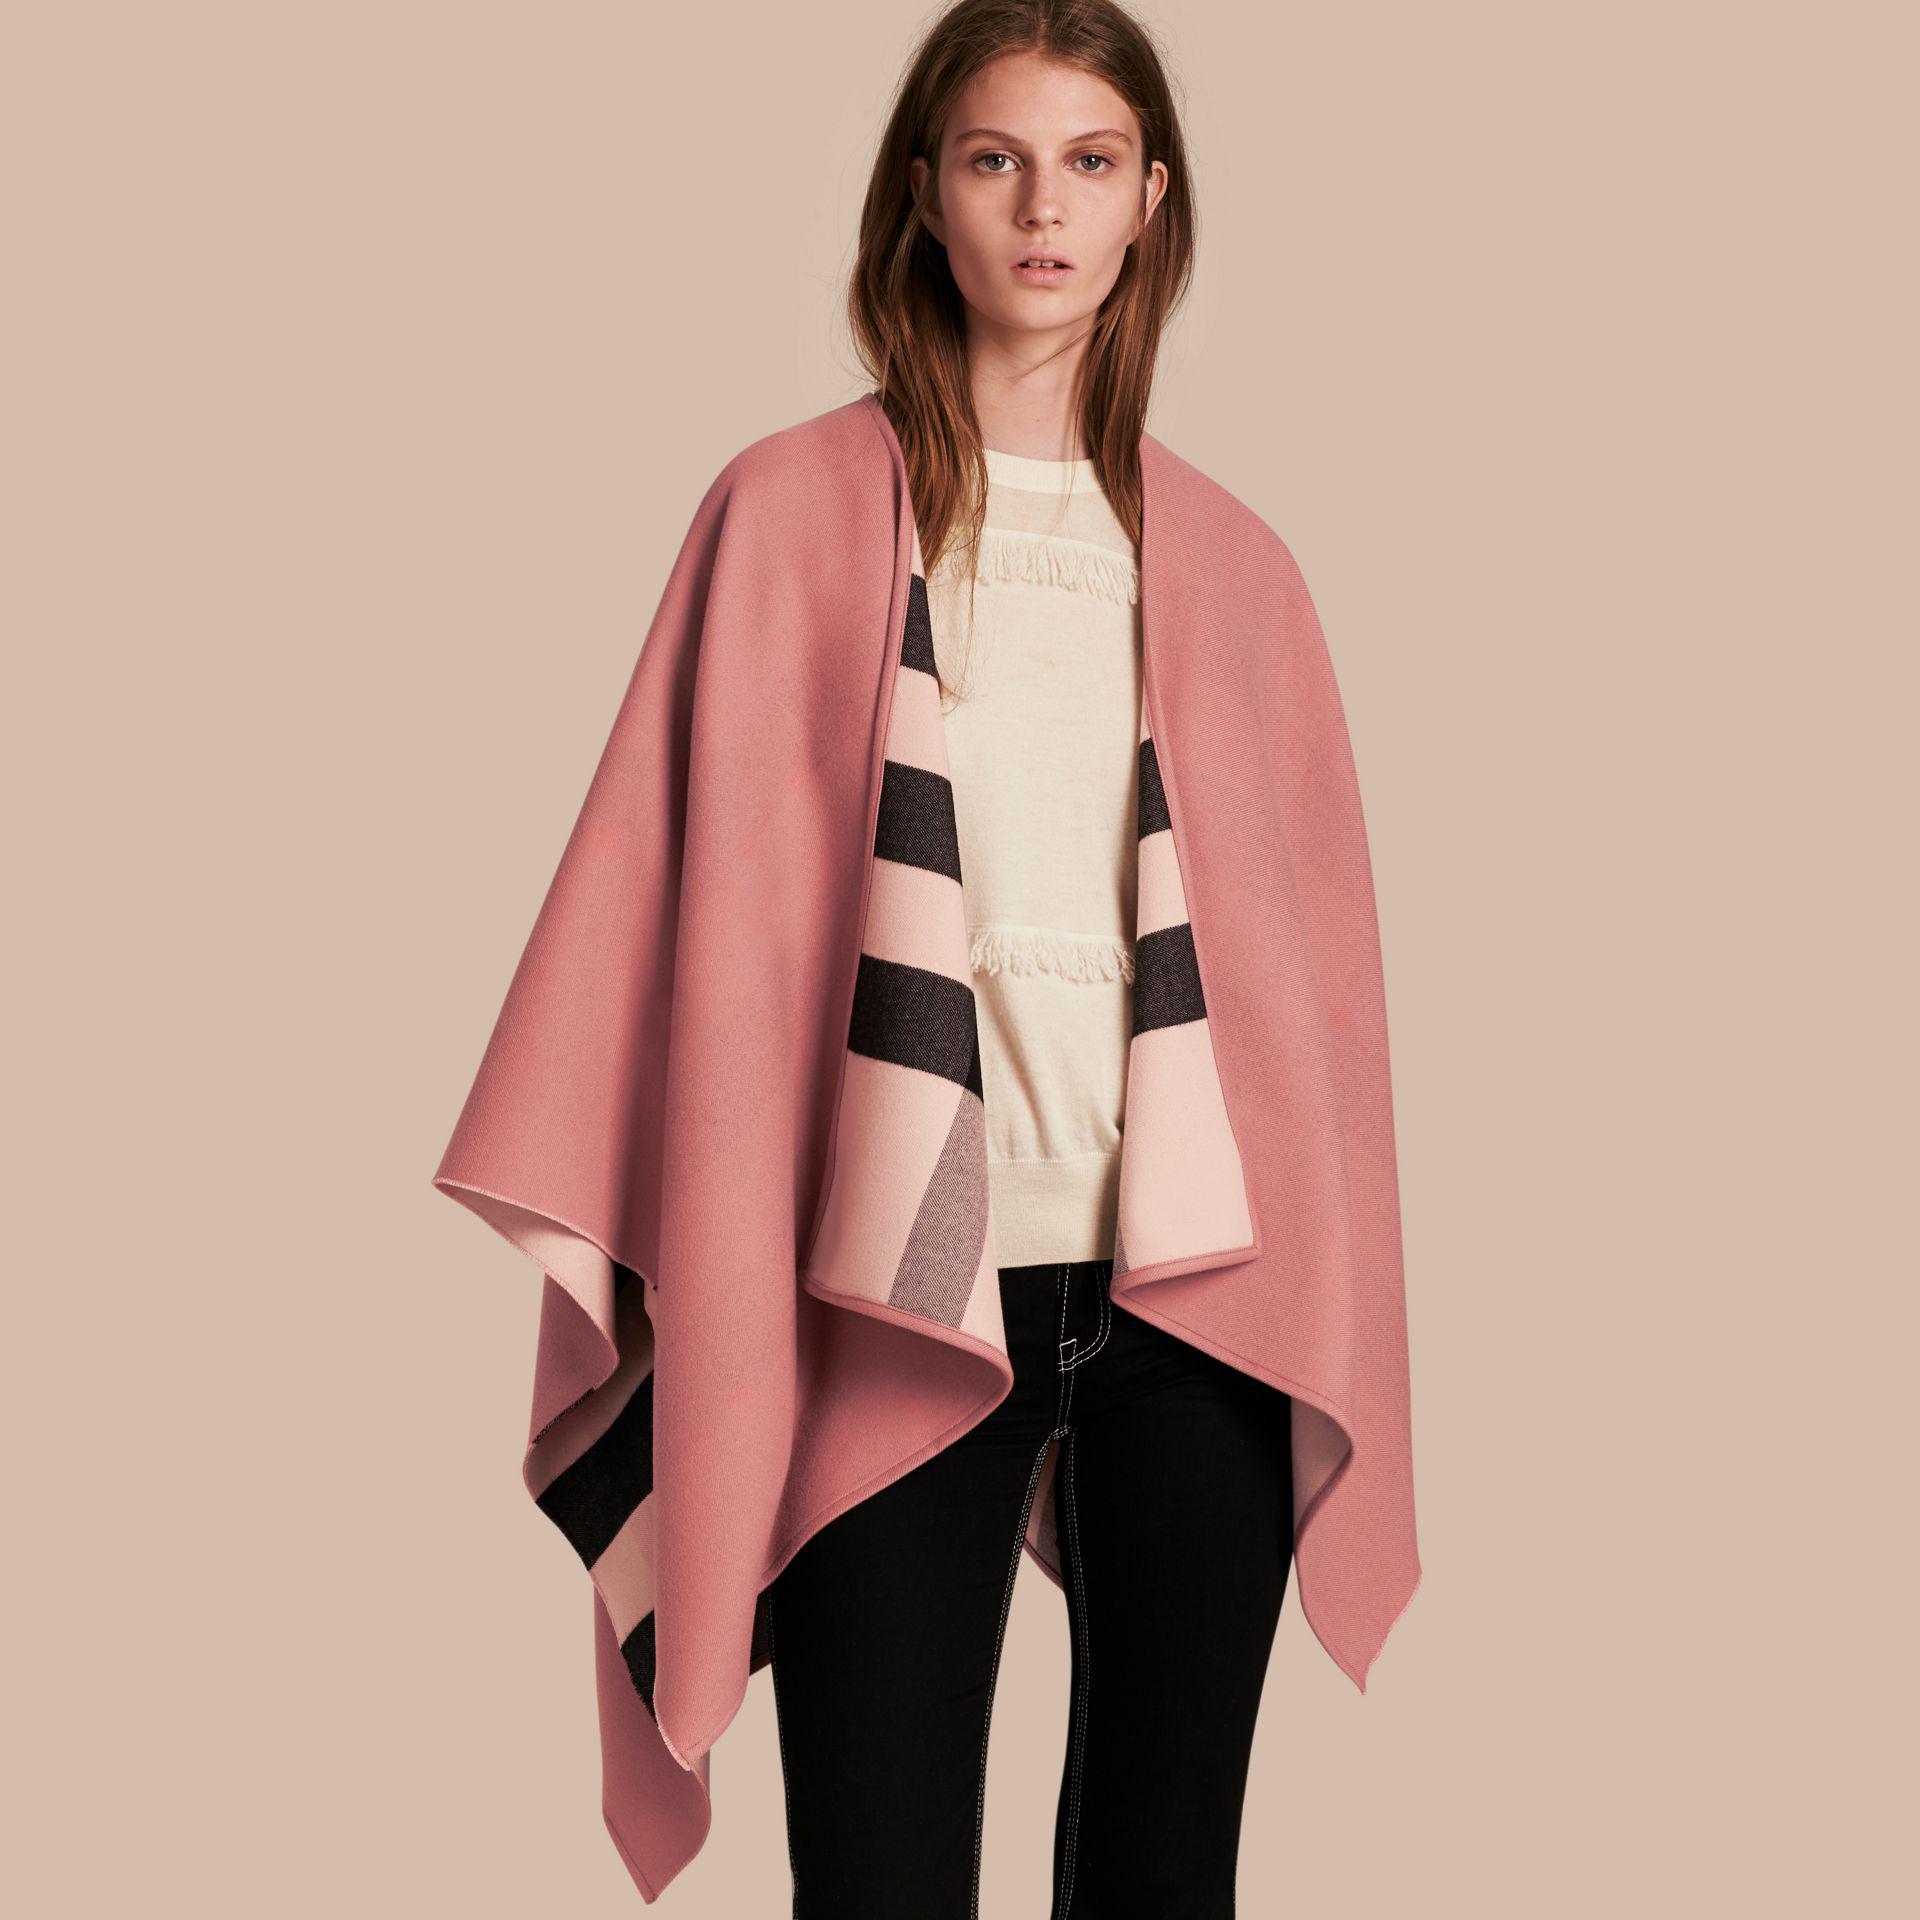 Burberry Reversible Check Merino Wool Poncho in Ash Rose (Pink) | Lyst